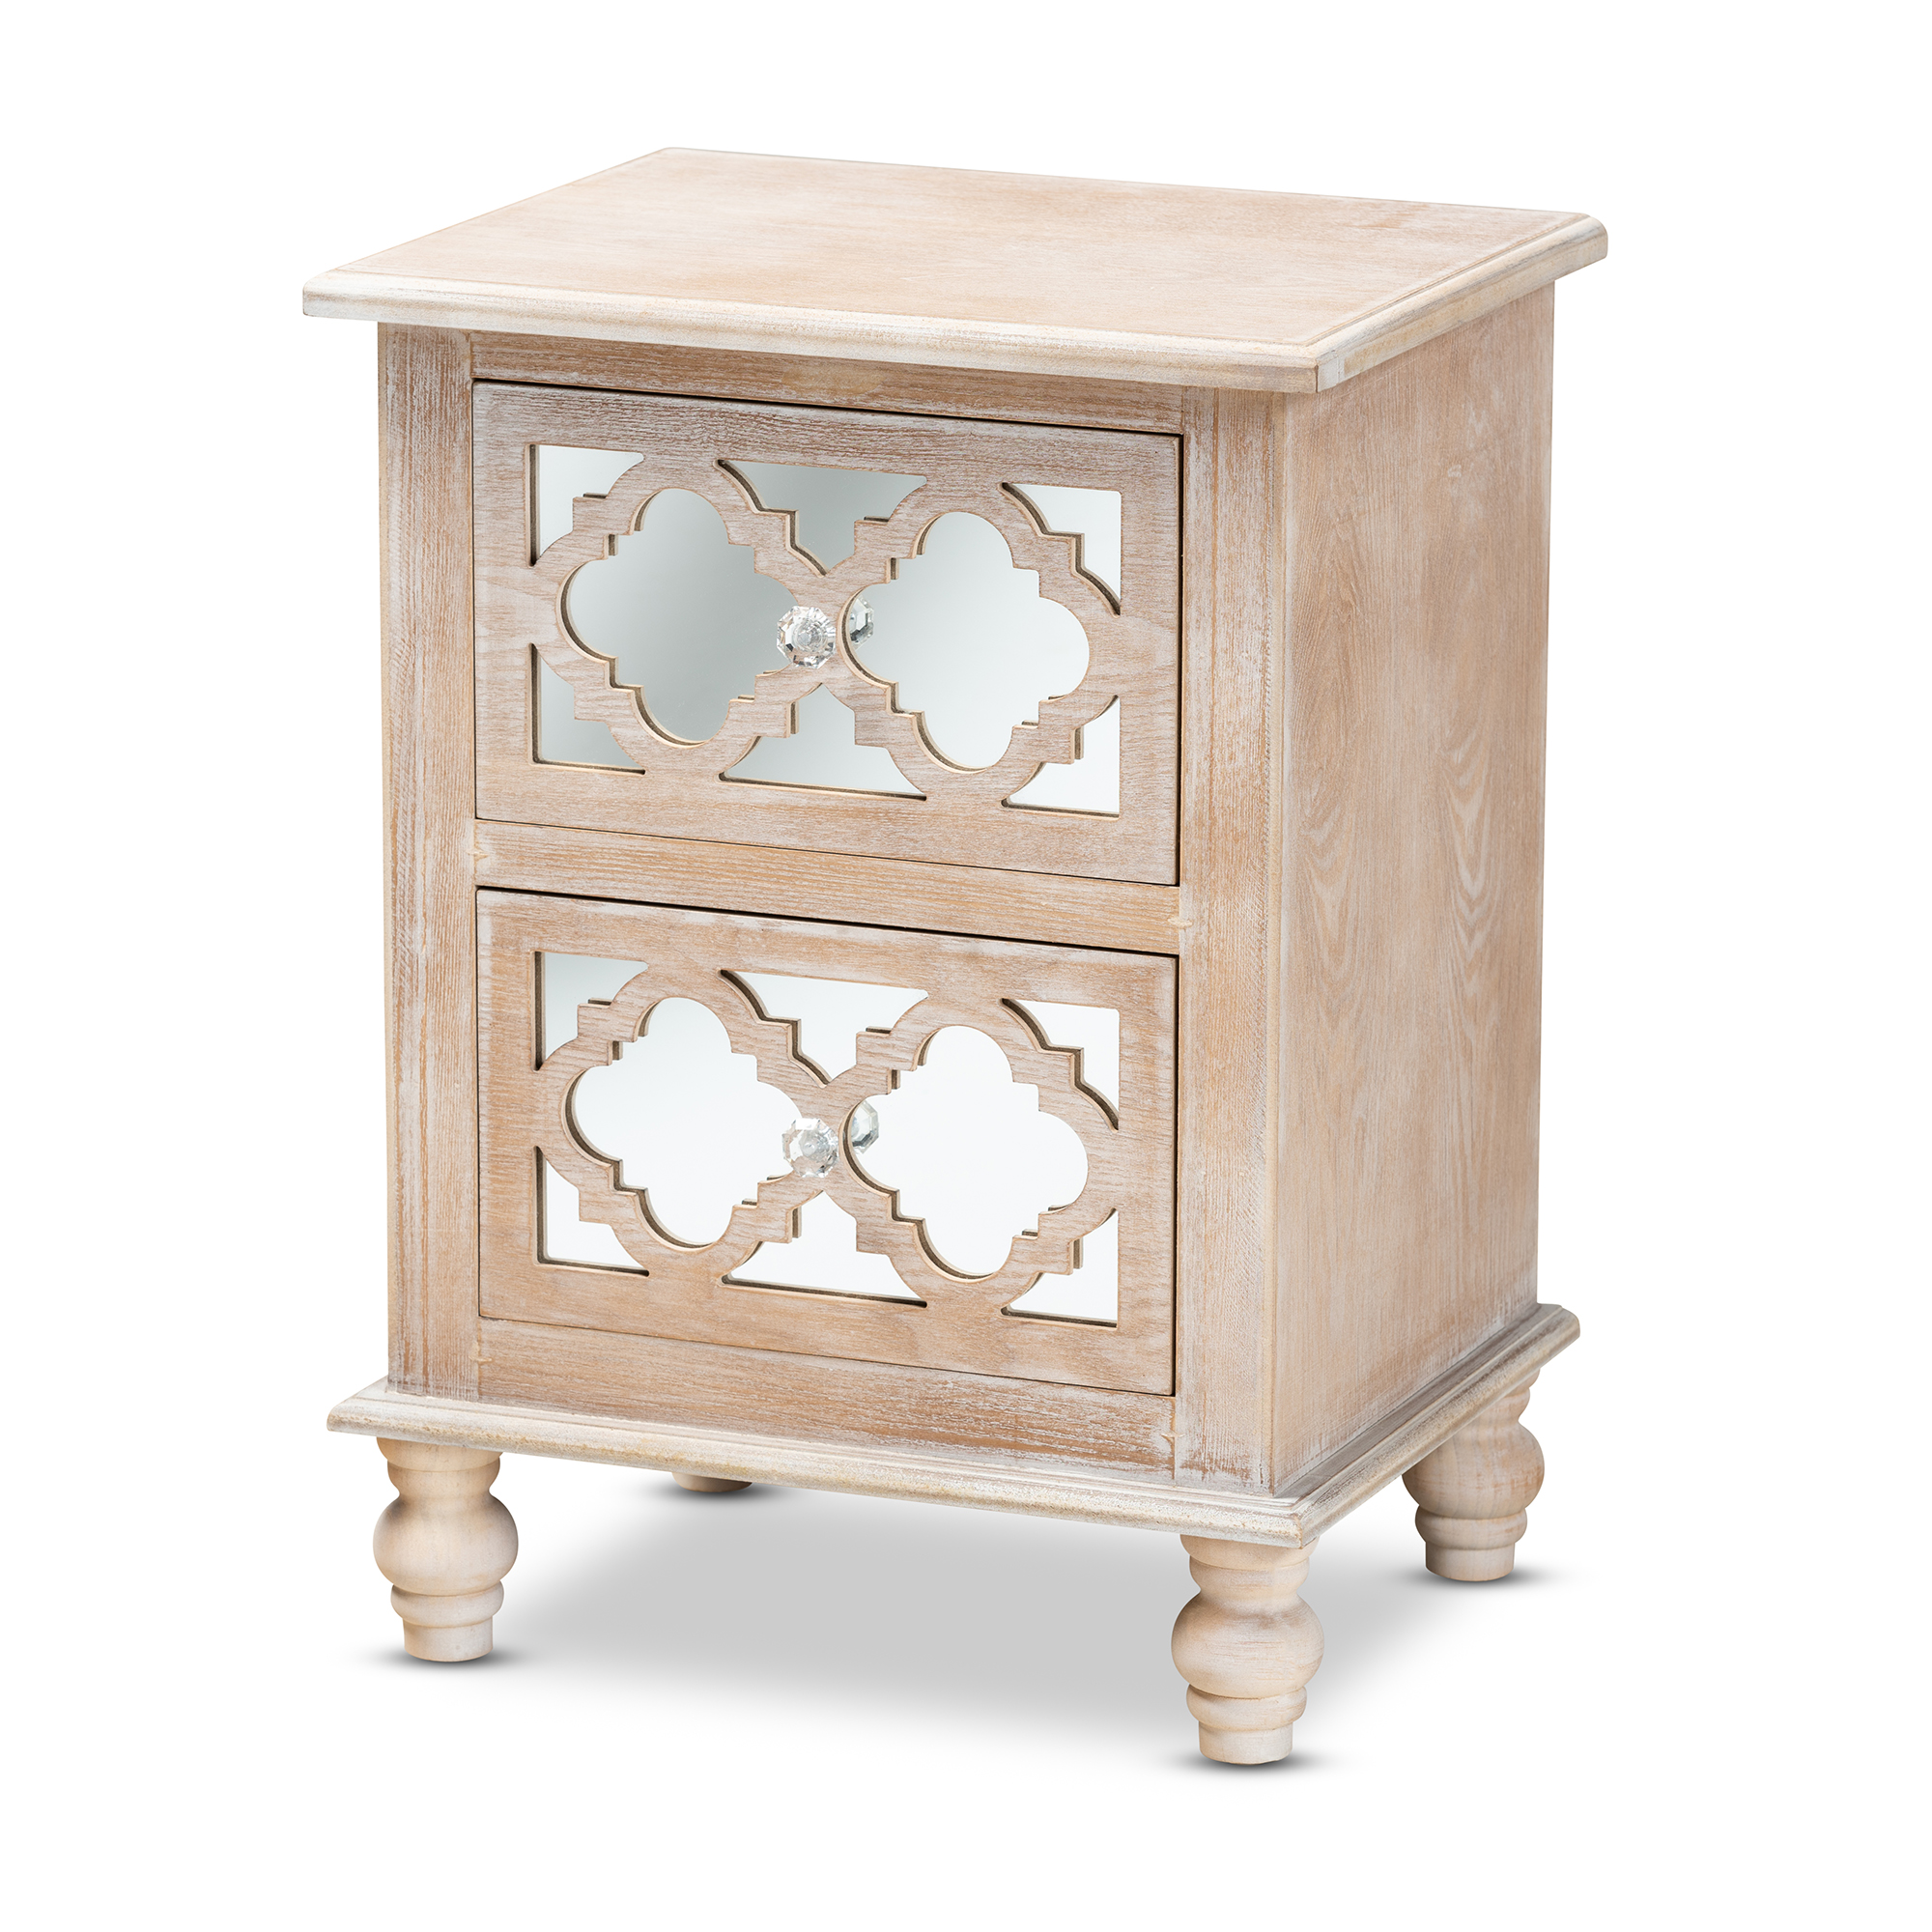 Baxton Studio Celia Transitional Rustic French Country White-Washed Wood and Mirror 2-Drawer Quatrefoil End Table